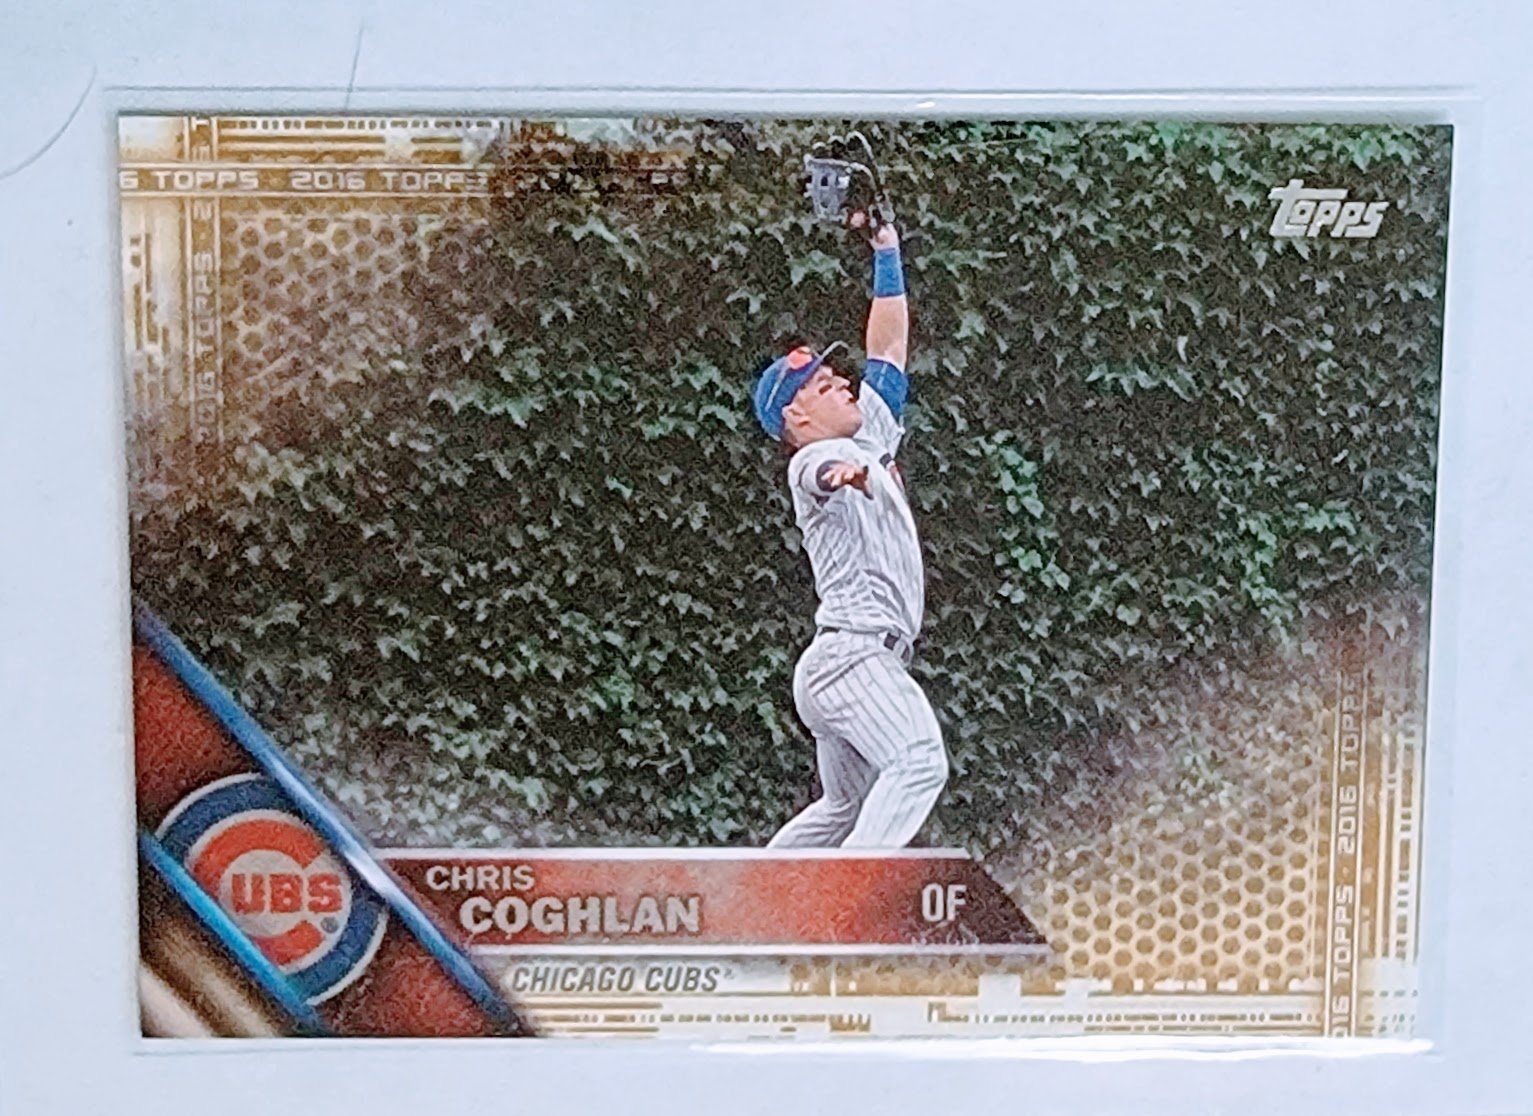 2016 Topps Chris Coghlan Gold #'d/2016 Insert Baseball Card TPTV simple Xclusive Collectibles   